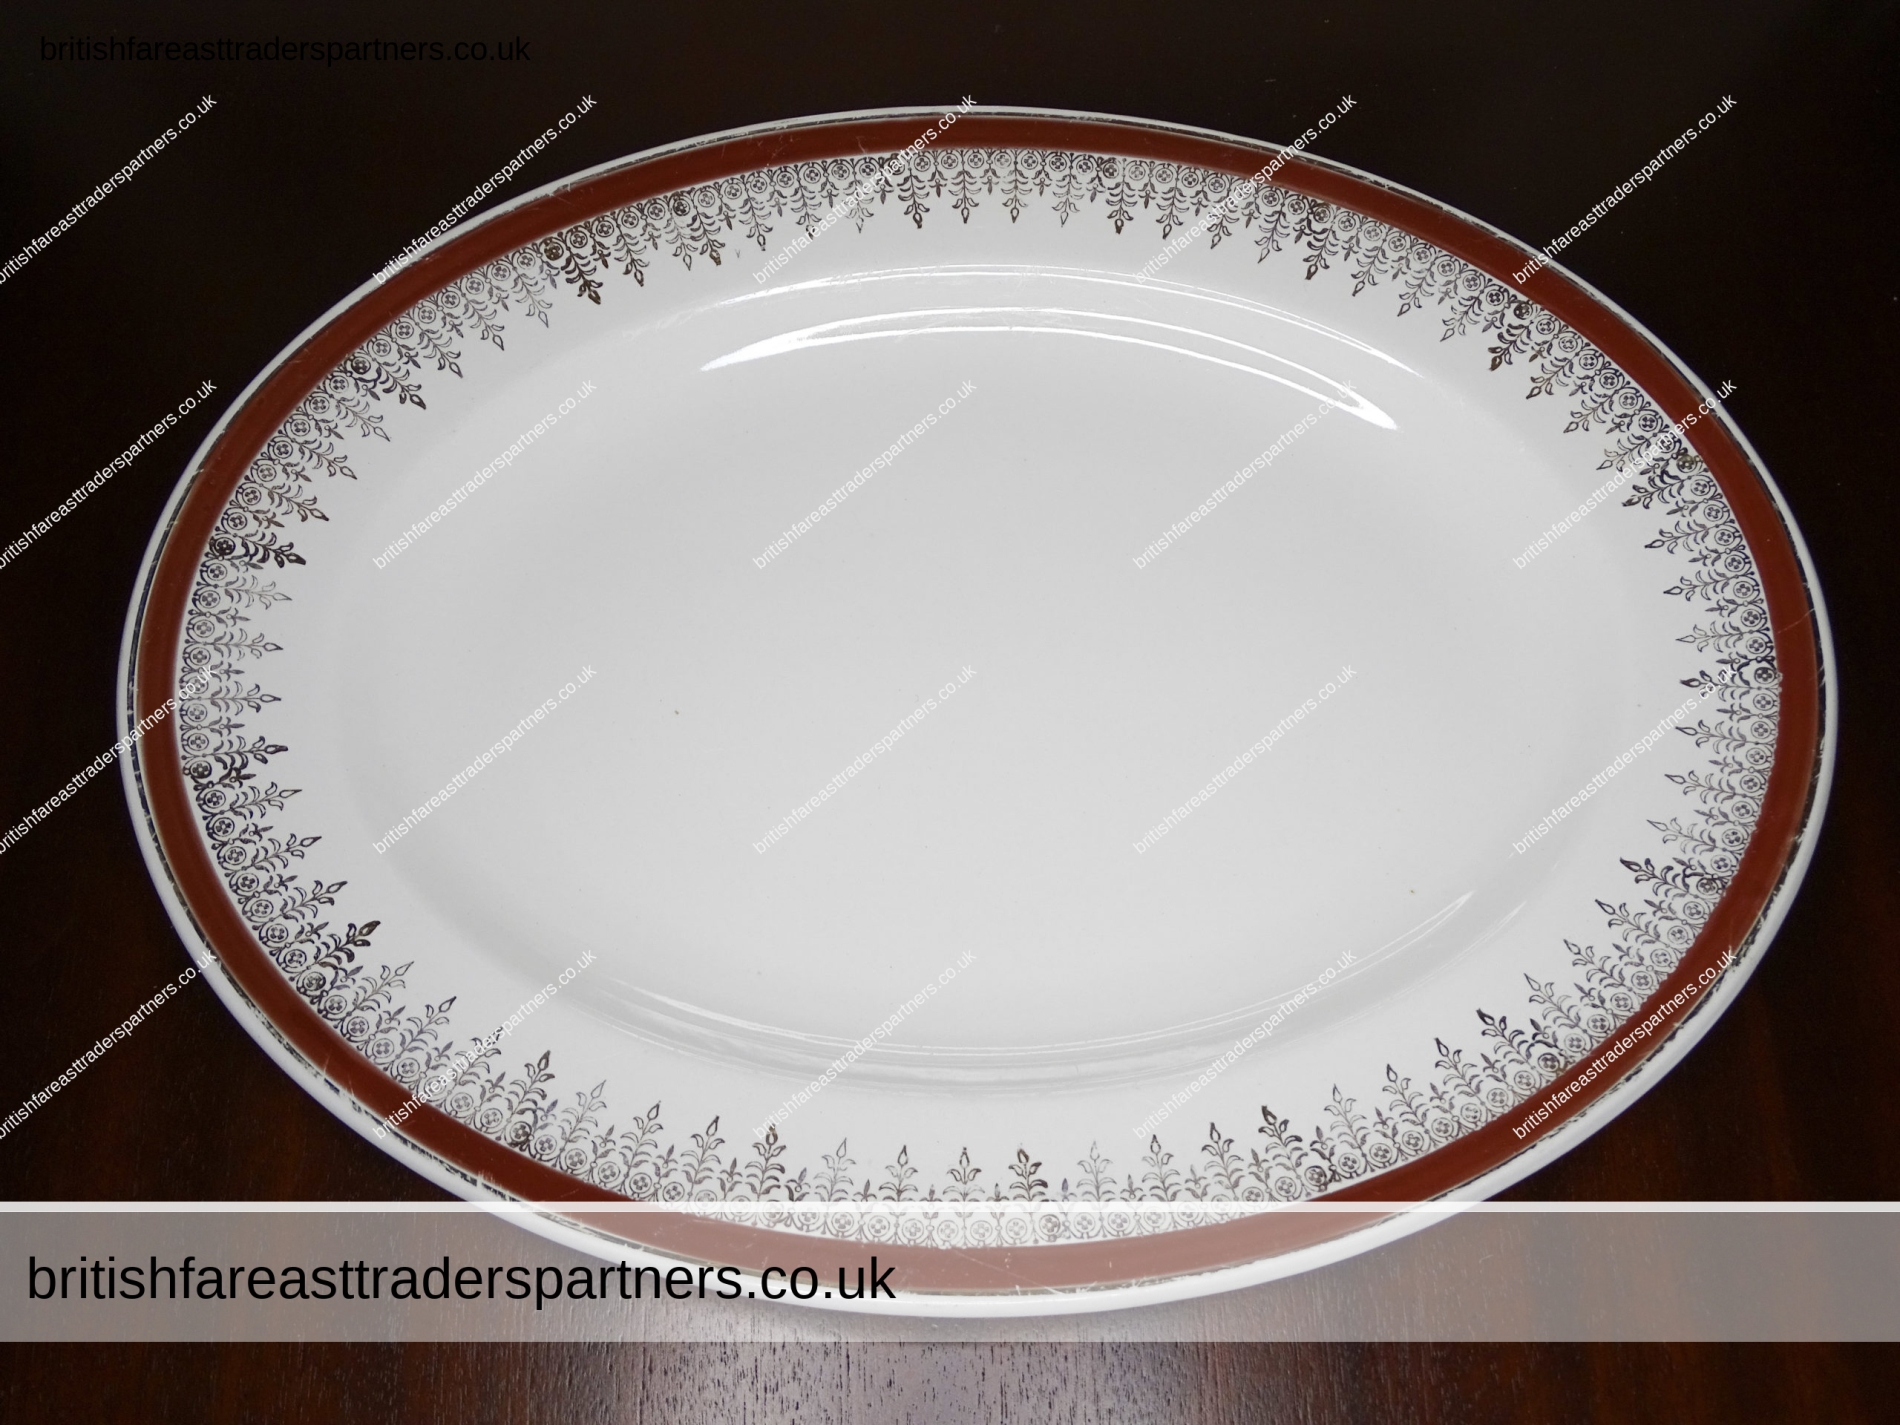 VINTAGE ALFRED MEAKIN ENGLAND ROYALTY / CROWN GLO-WHITE IRONSTONE ENGLISH CHRISTMAS FESTIVE DINNERWARE SERVING PLATTER DISH CIRCA 1945